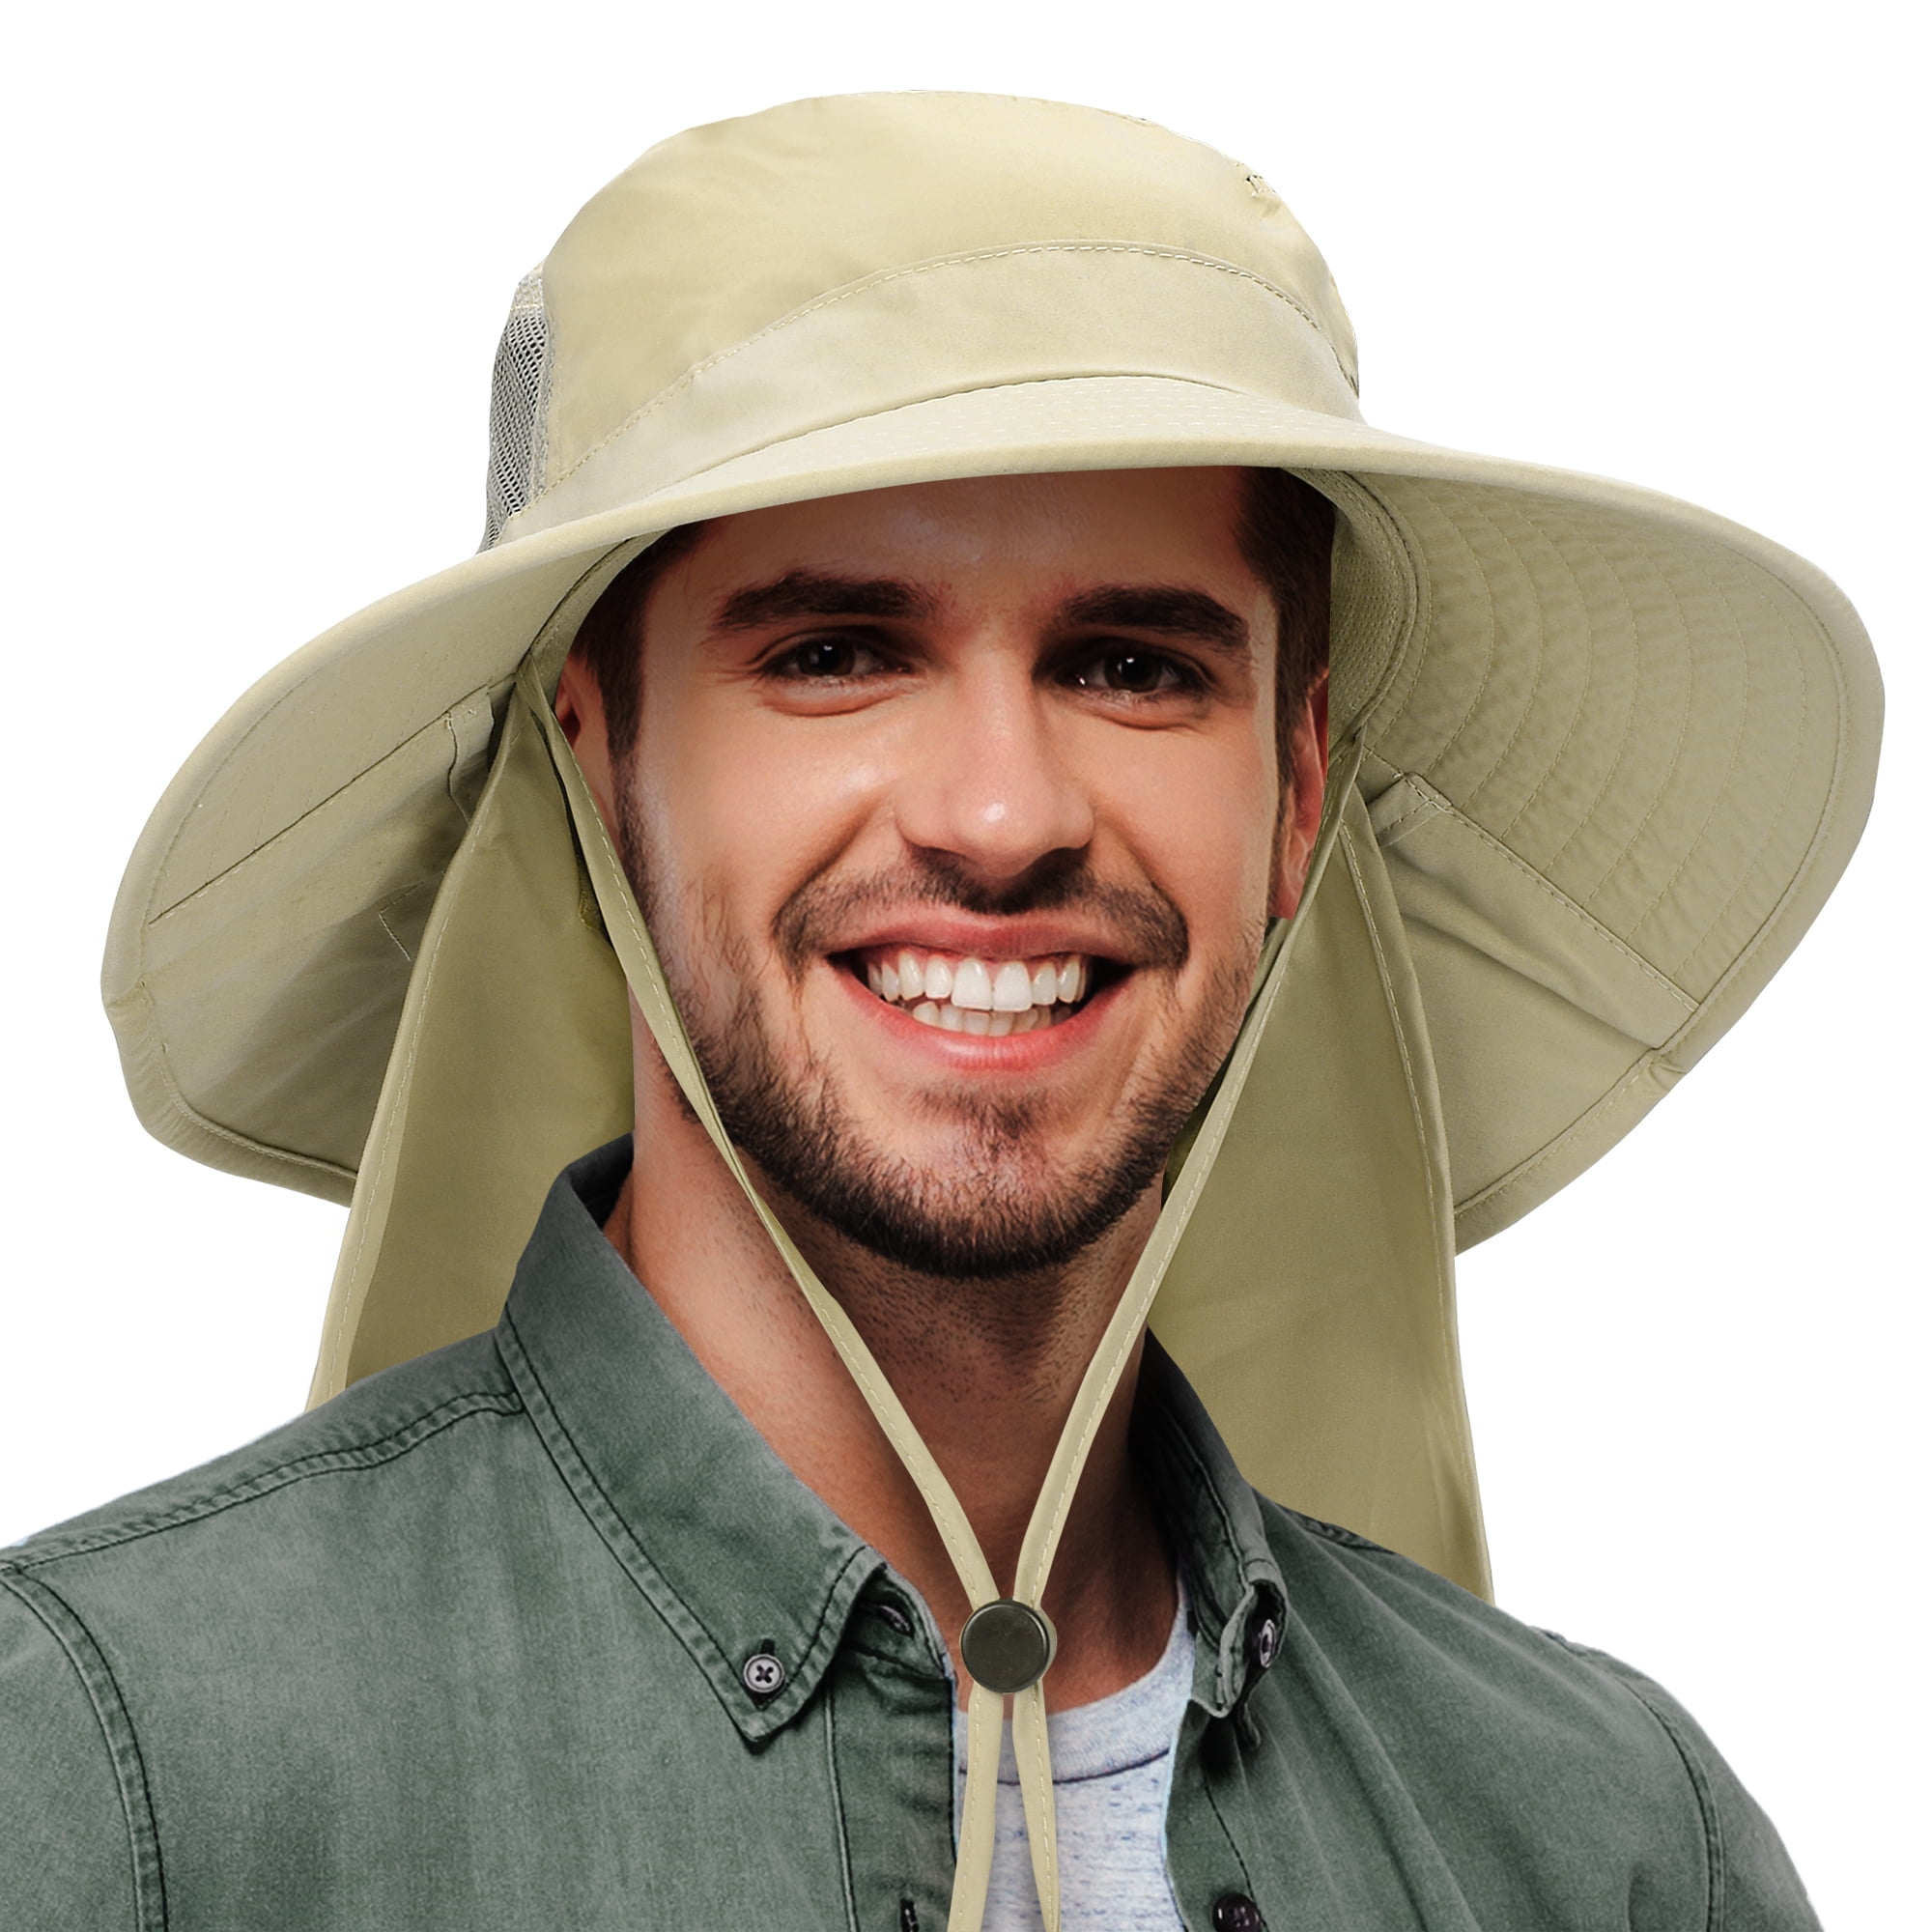 KeepSa Cotton Sun Hat UV Protection Summer Hats Beach Hat Safari Boonie Hat Foldable Fishsing Hat with Breathable Mesh and Adjustable Chin Strap